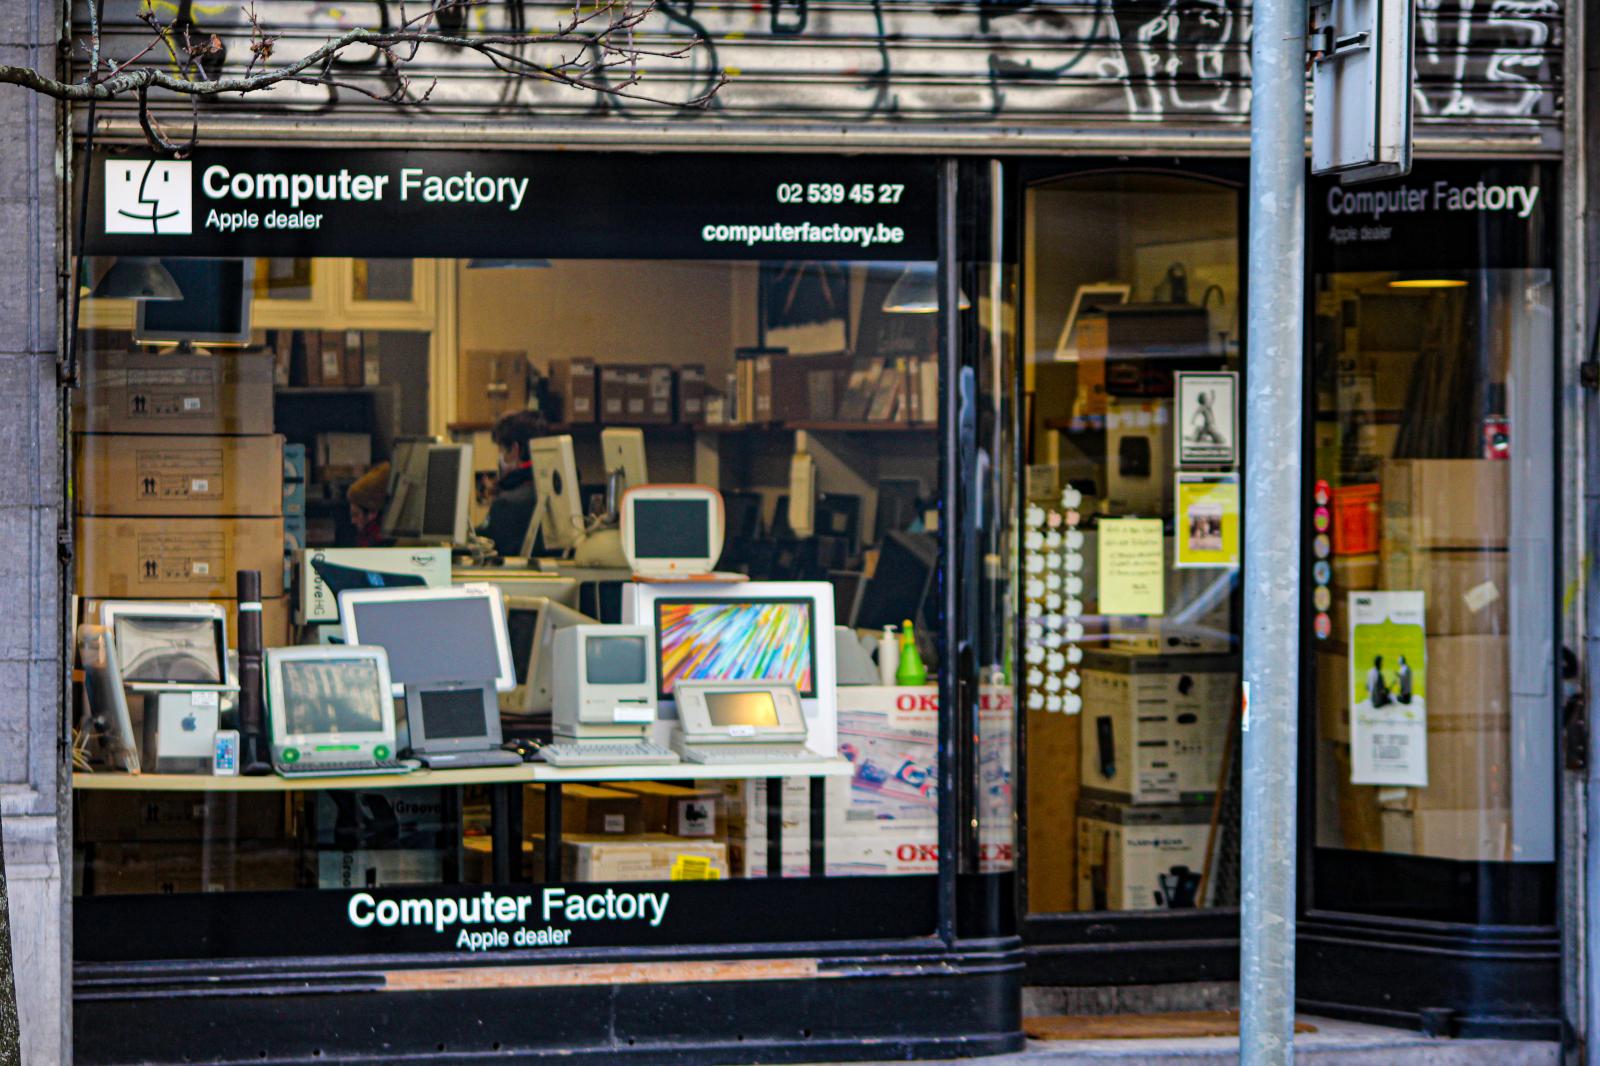 Computer Factory | Buy this image